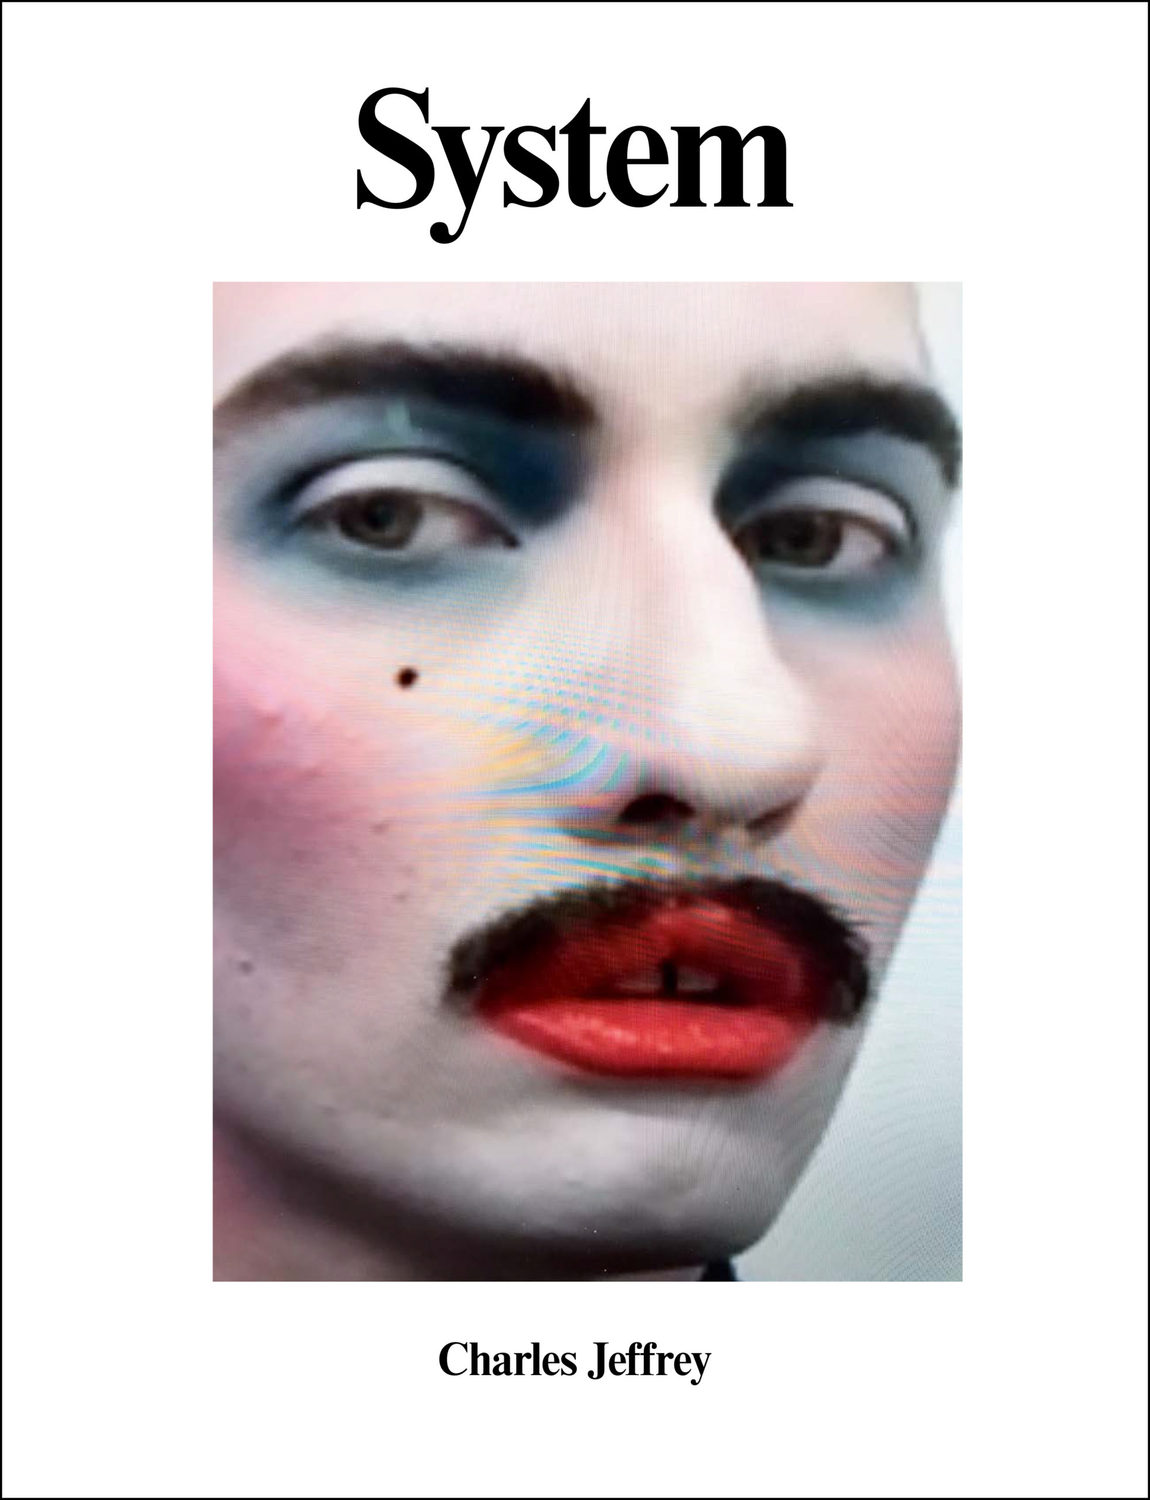 SYSTEM15-COVER-Charles-Jeffrey-scaled.jpg